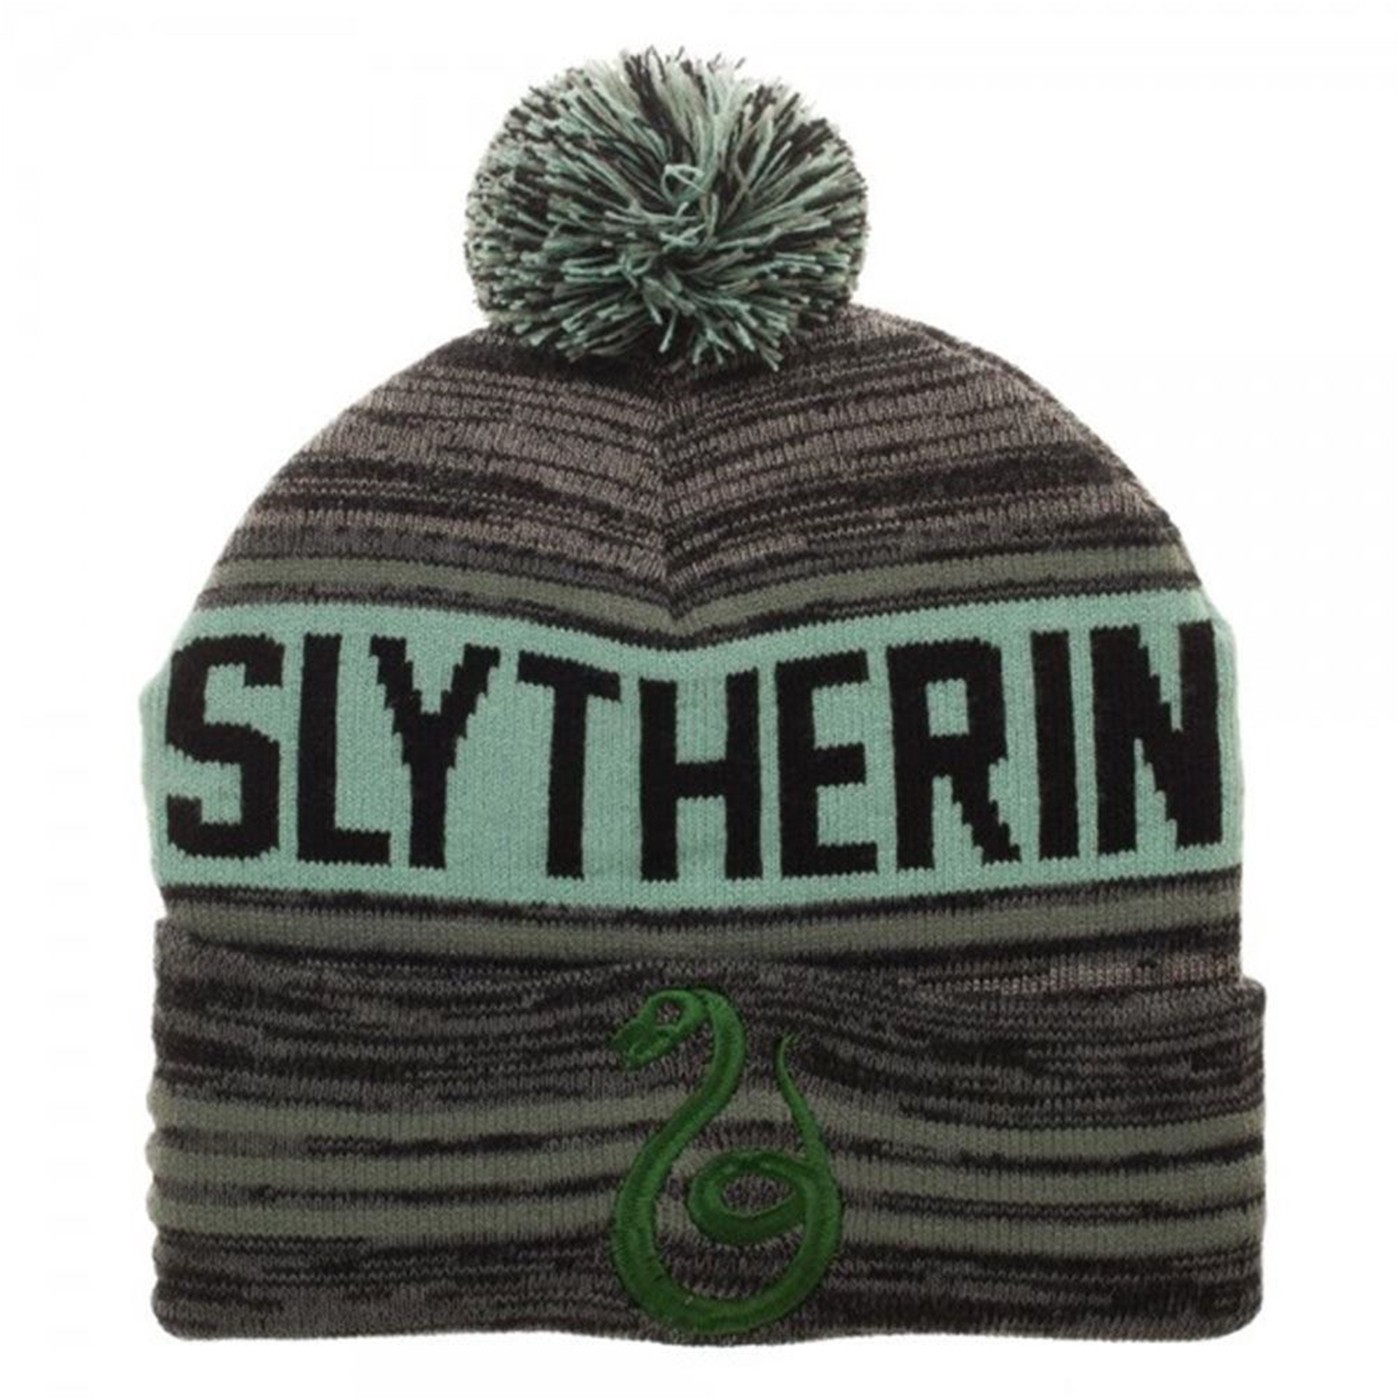 Harry Potter Slytherin Cuffed Beanie